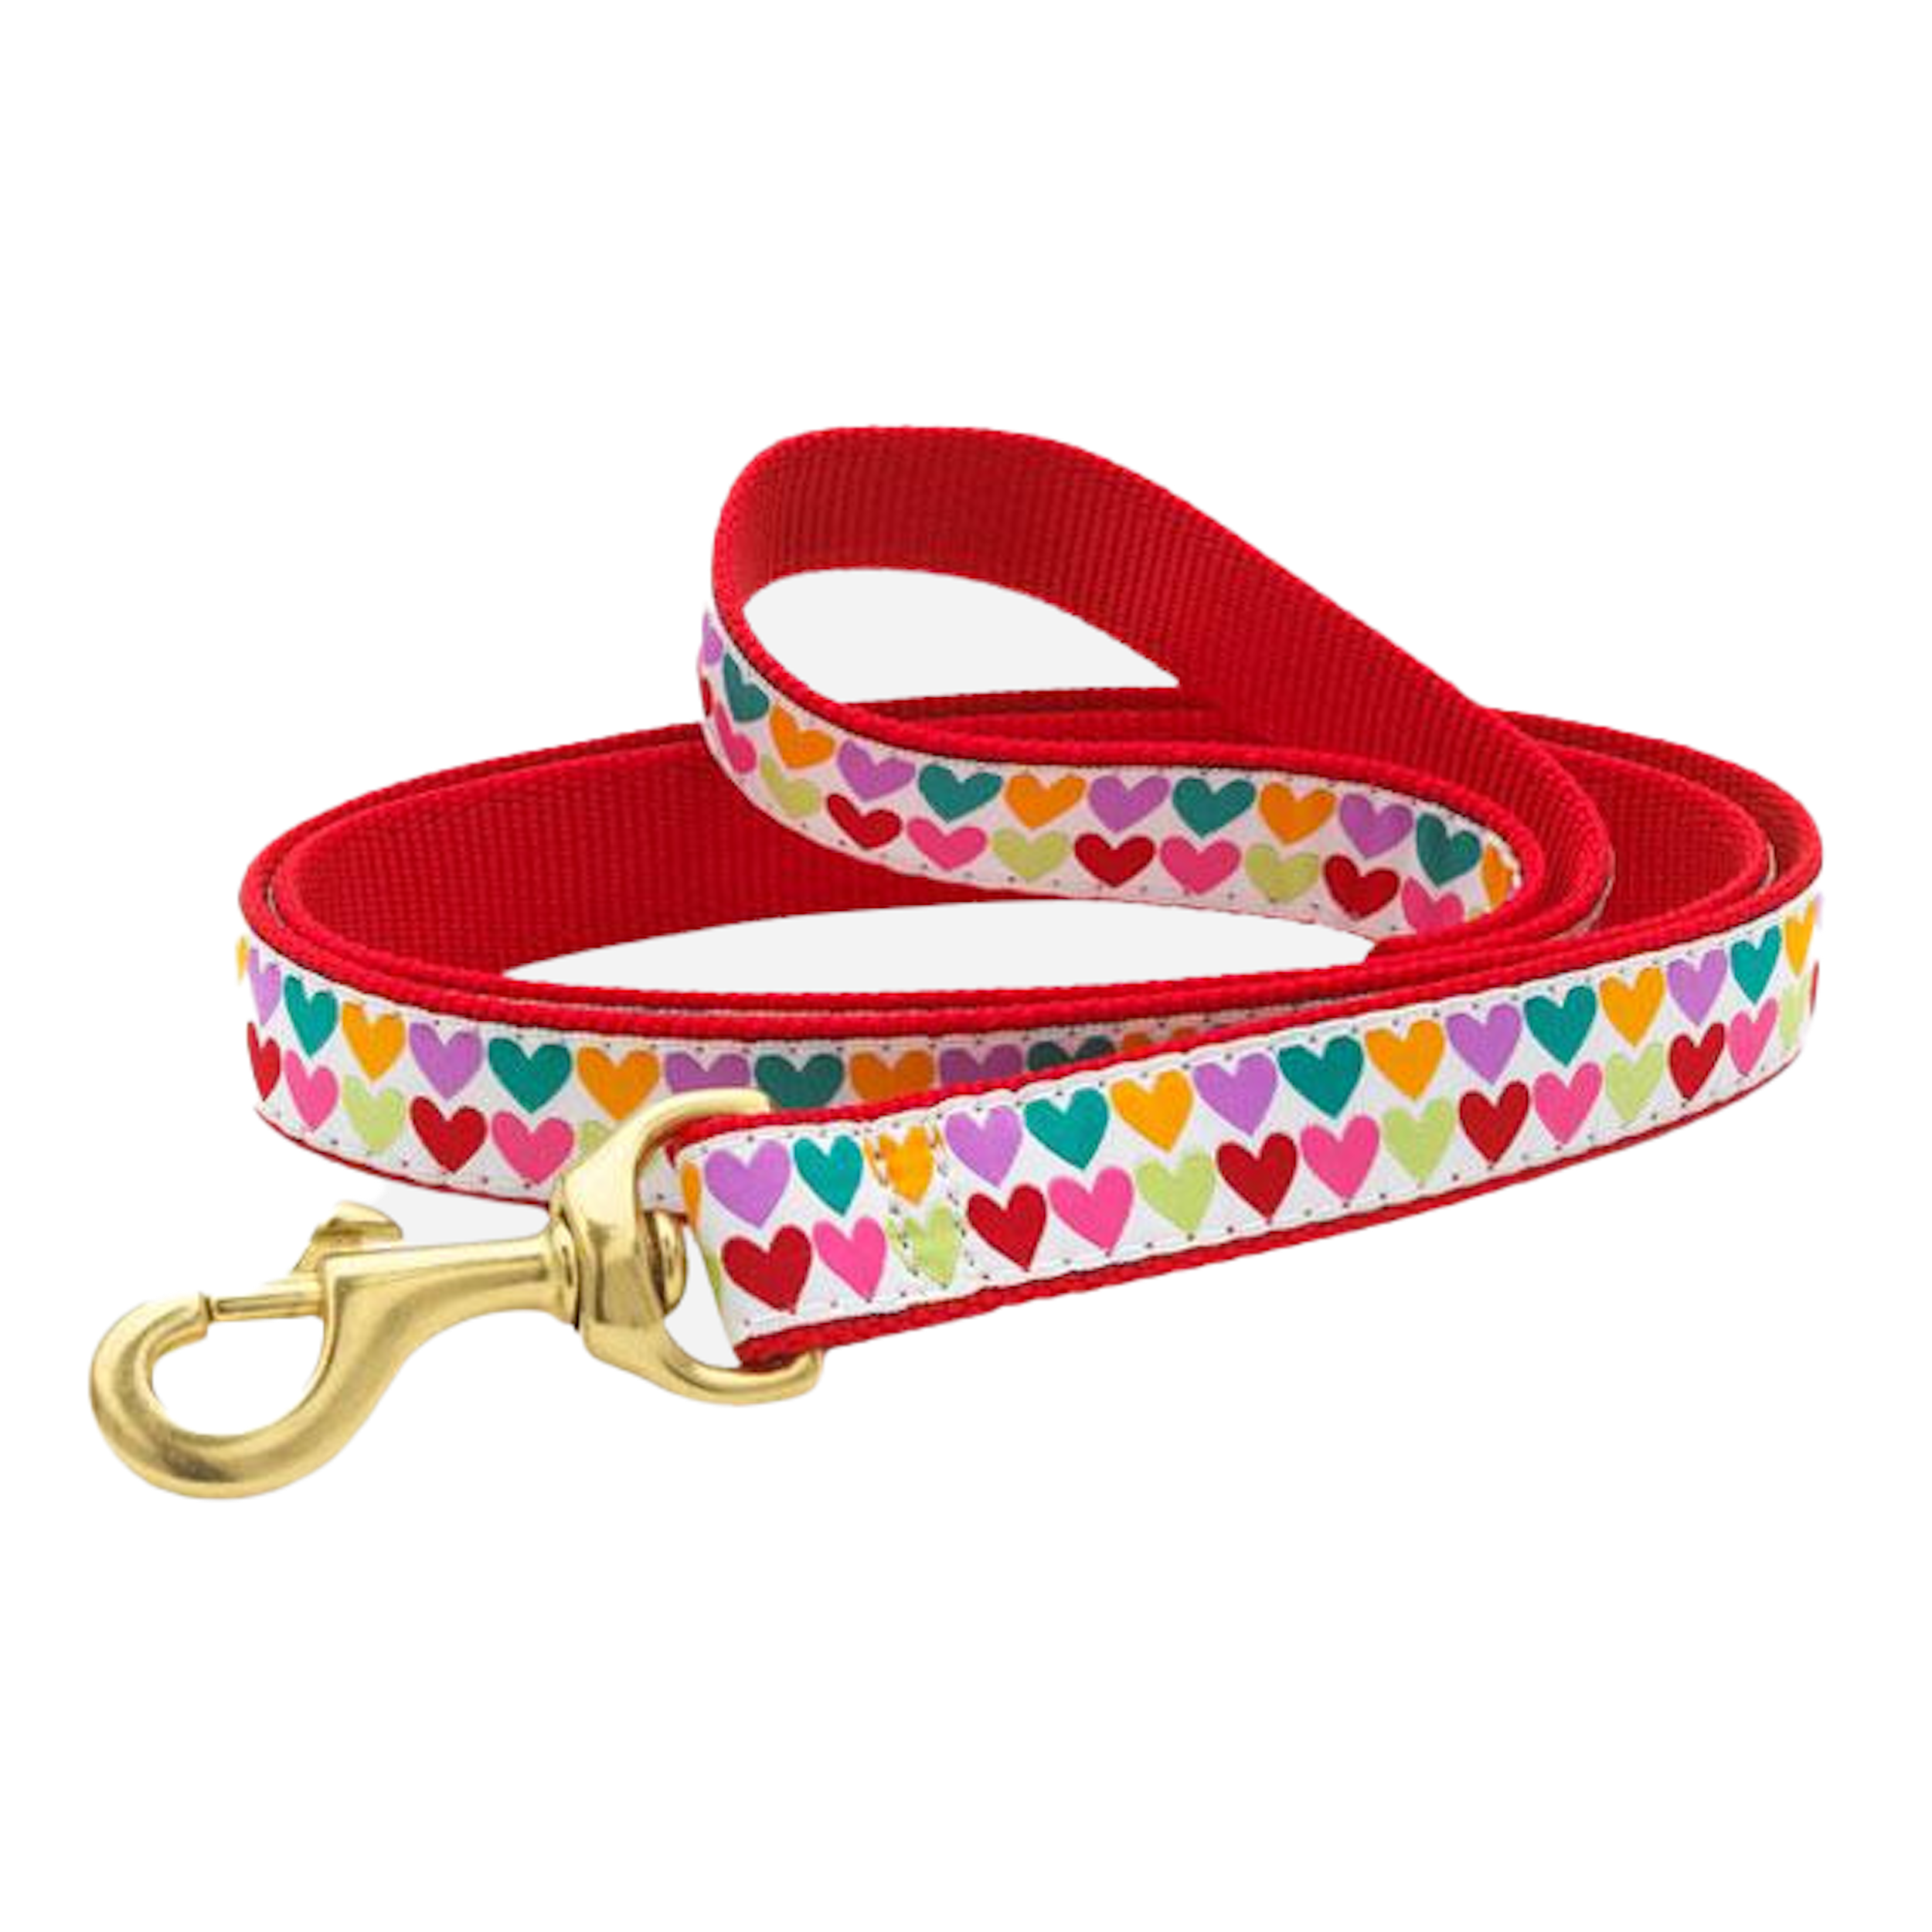 POP-HEARTS-VALENTINES-DOG-LEASH-SMALL-BREED-TEACUP